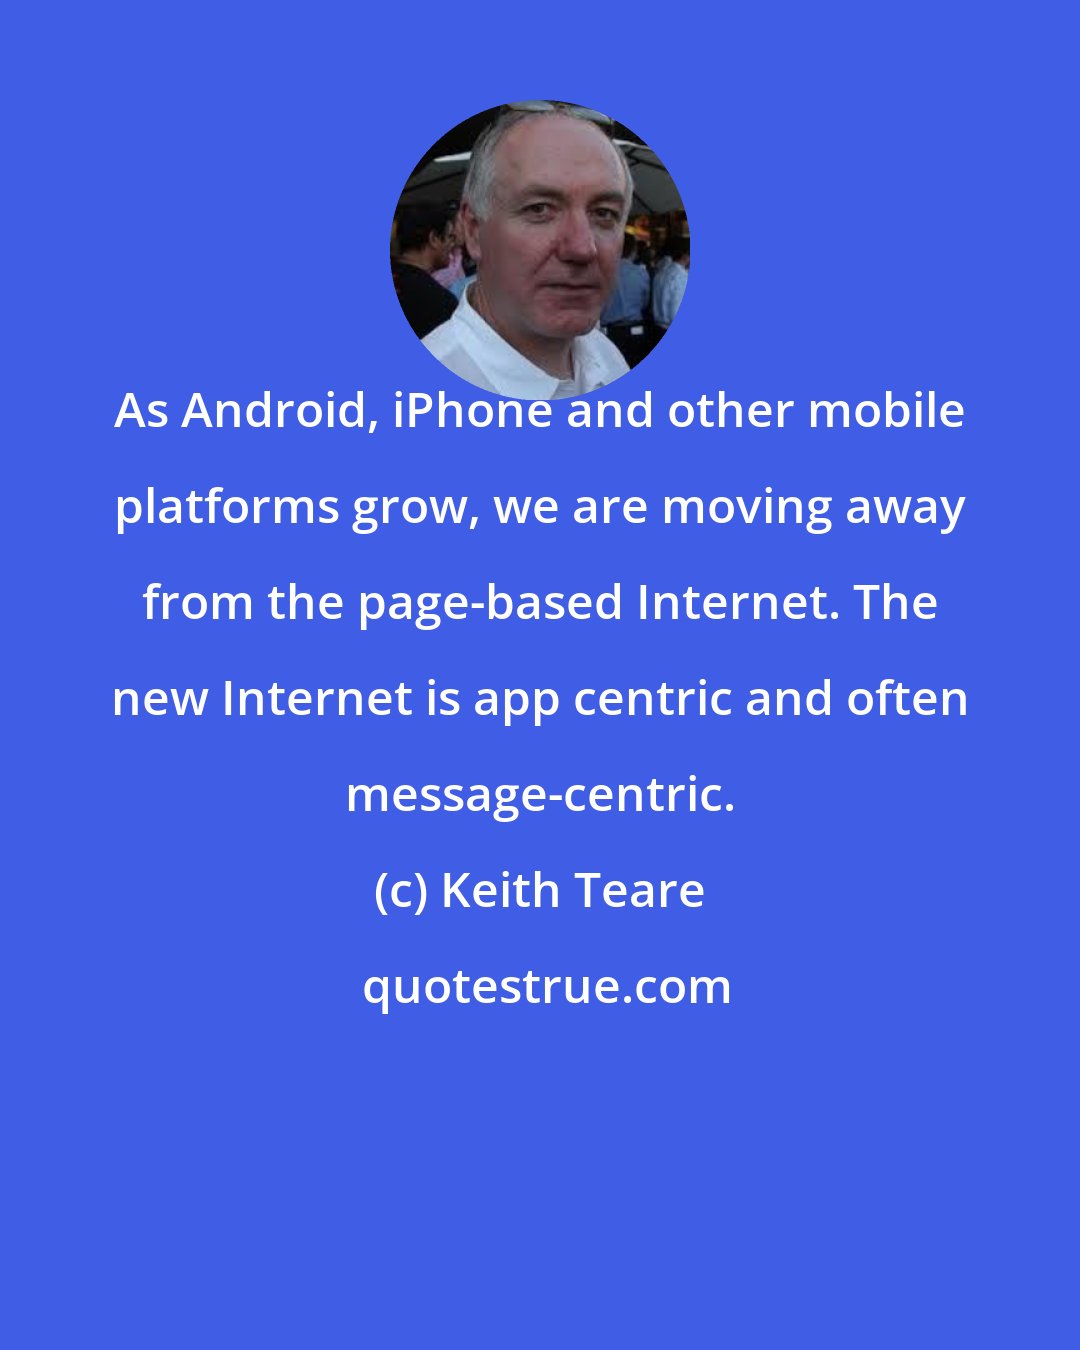 Keith Teare: As Android, iPhone and other mobile platforms grow, we are moving away from the page-based Internet. The new Internet is app centric and often message-centric.